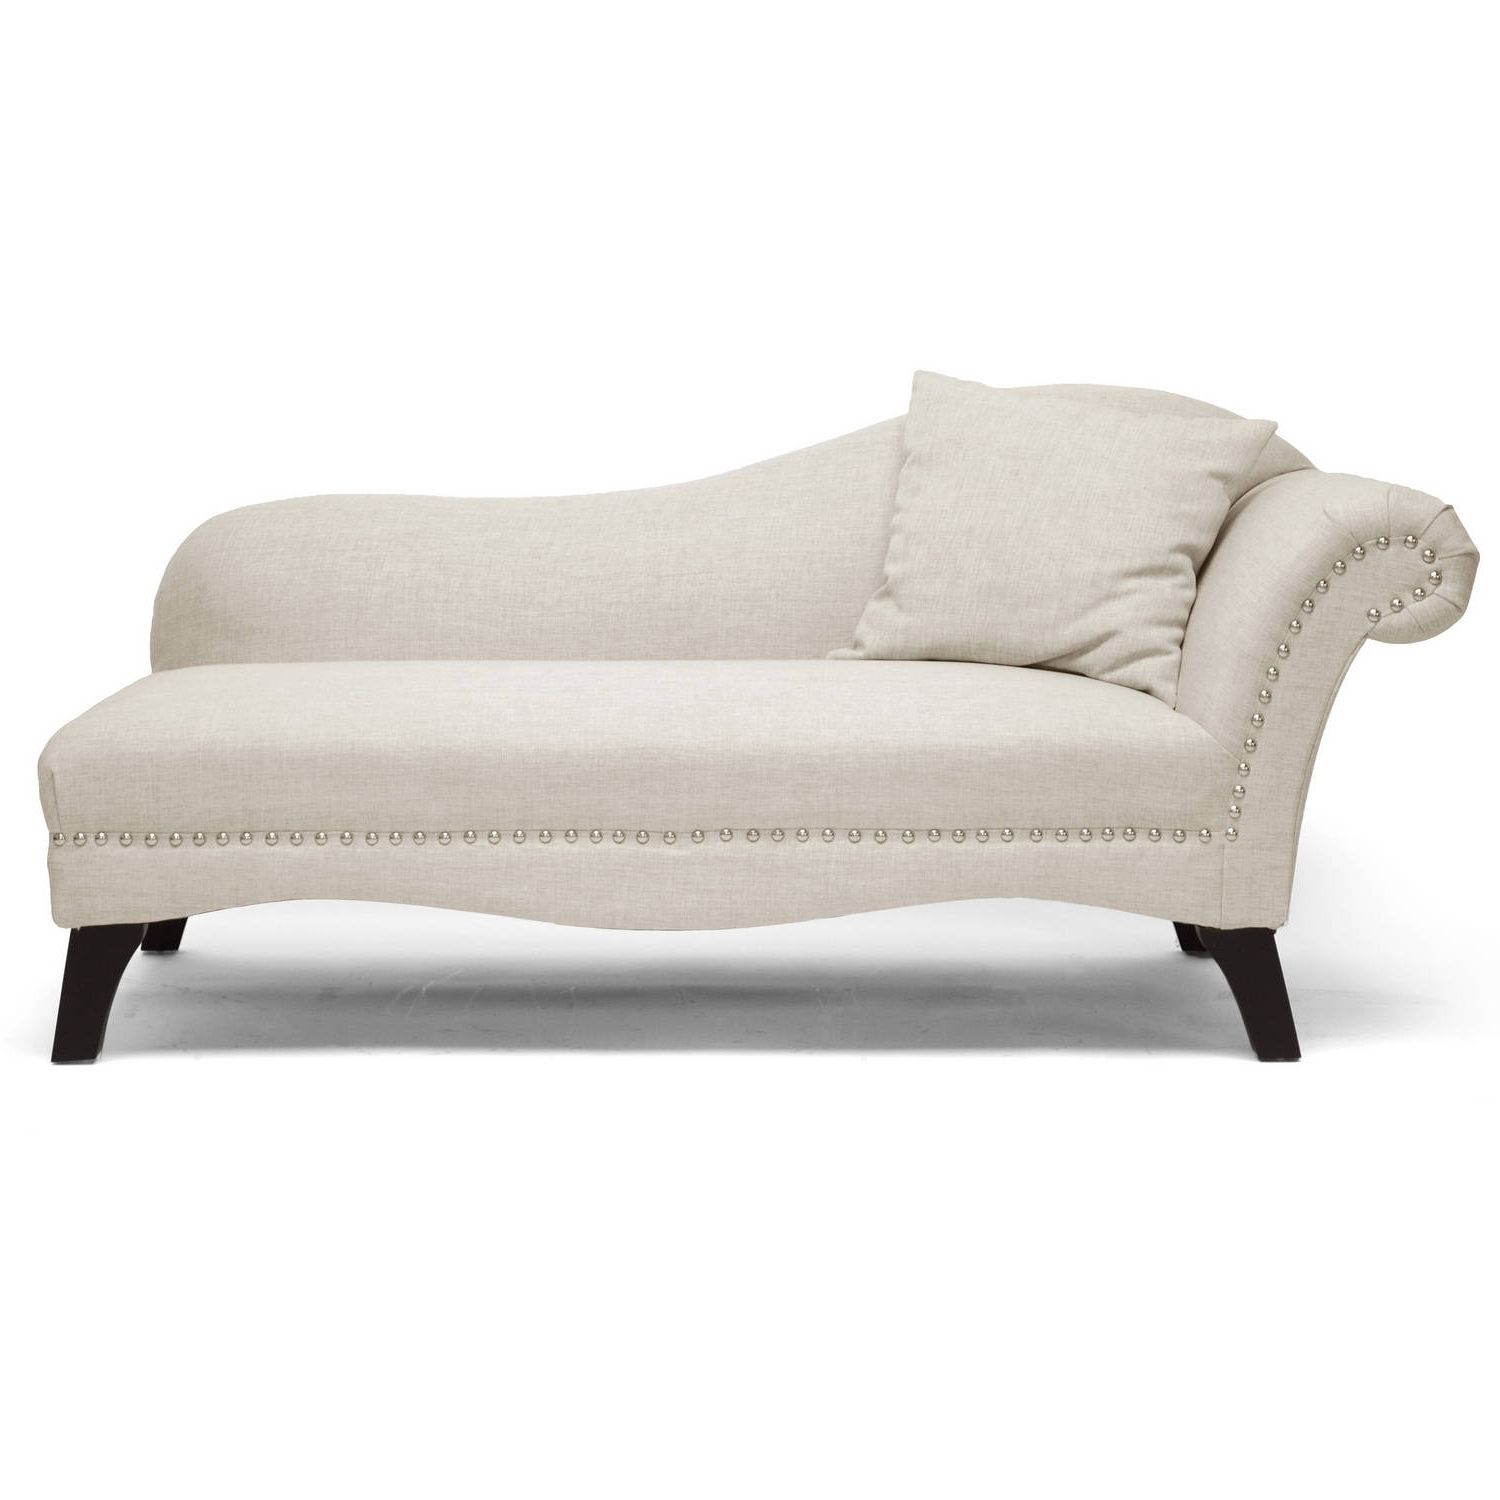 Most Recently Released Chaise Lounges – Walmart Intended For Sofa Chaise Lounges (View 2 of 15)